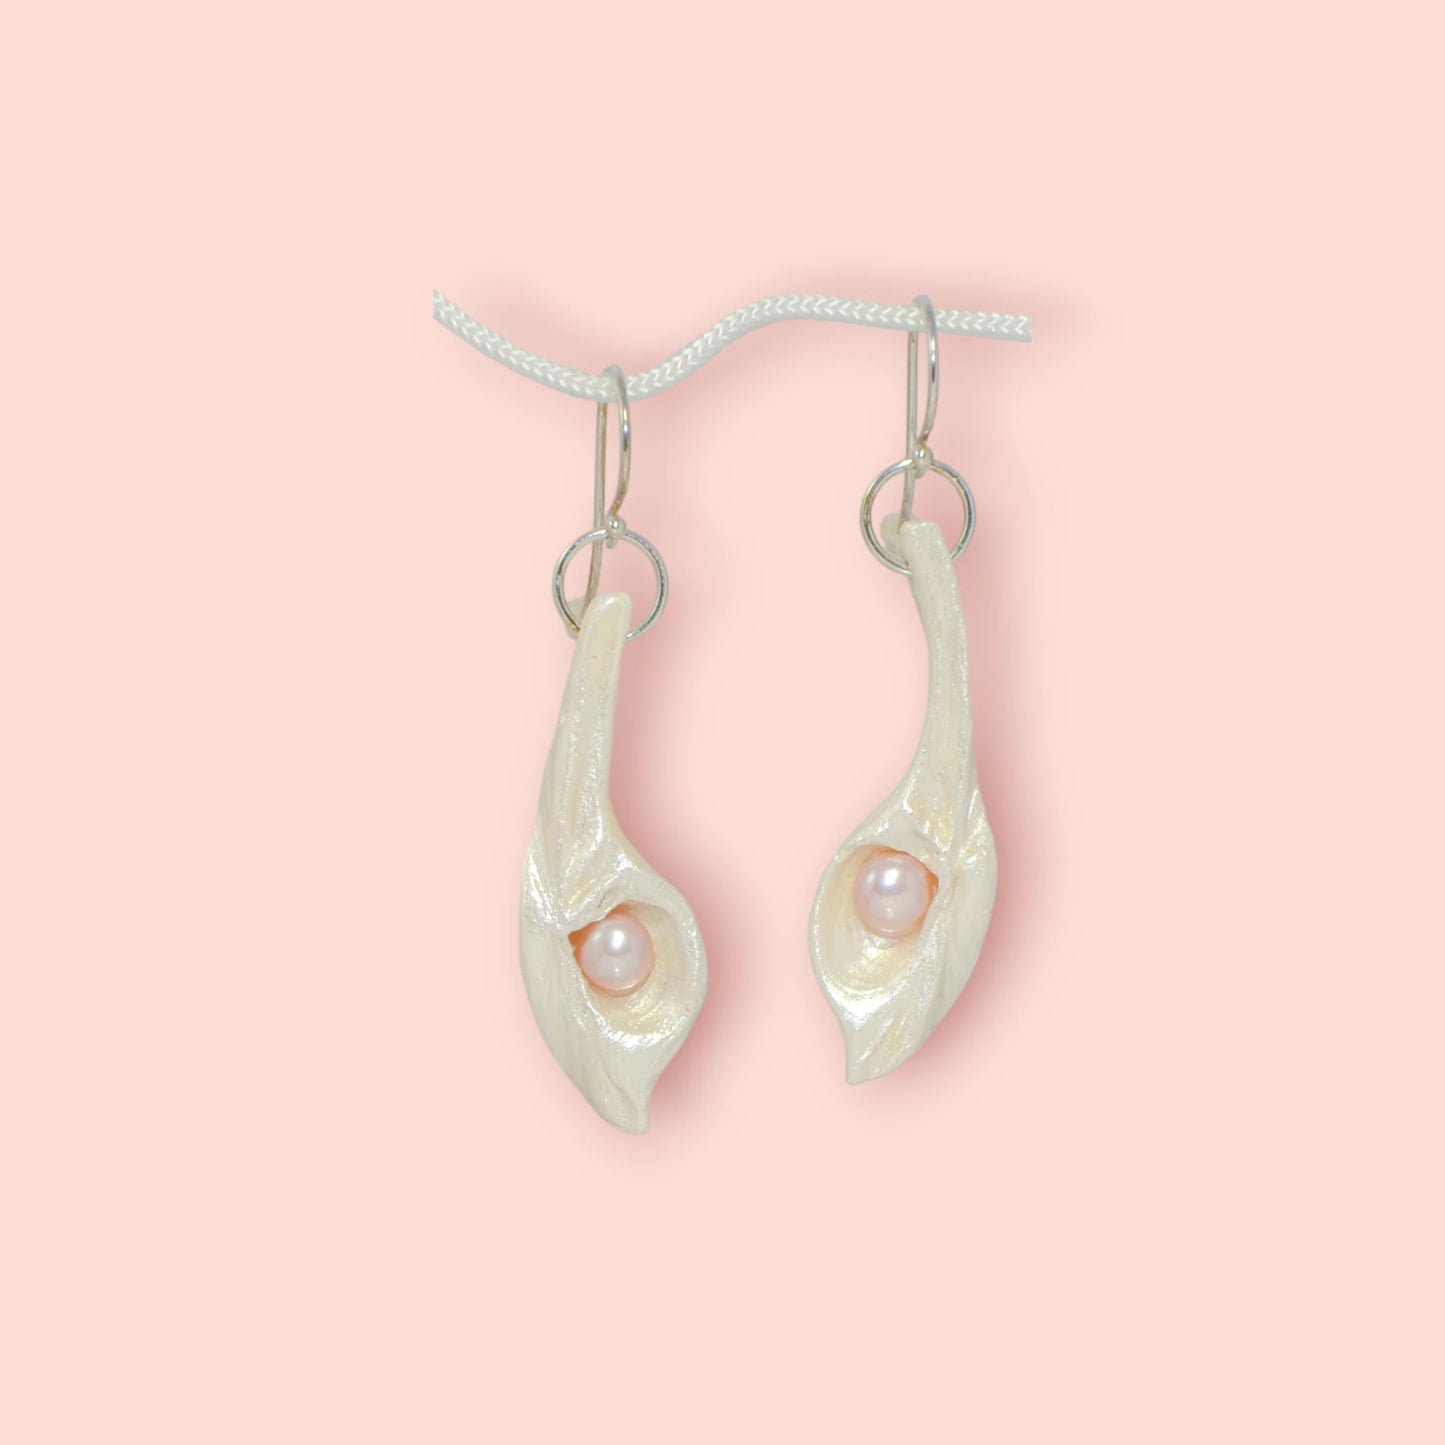 Sea Plume natural seashell earrings with real pink freshwater pearls.